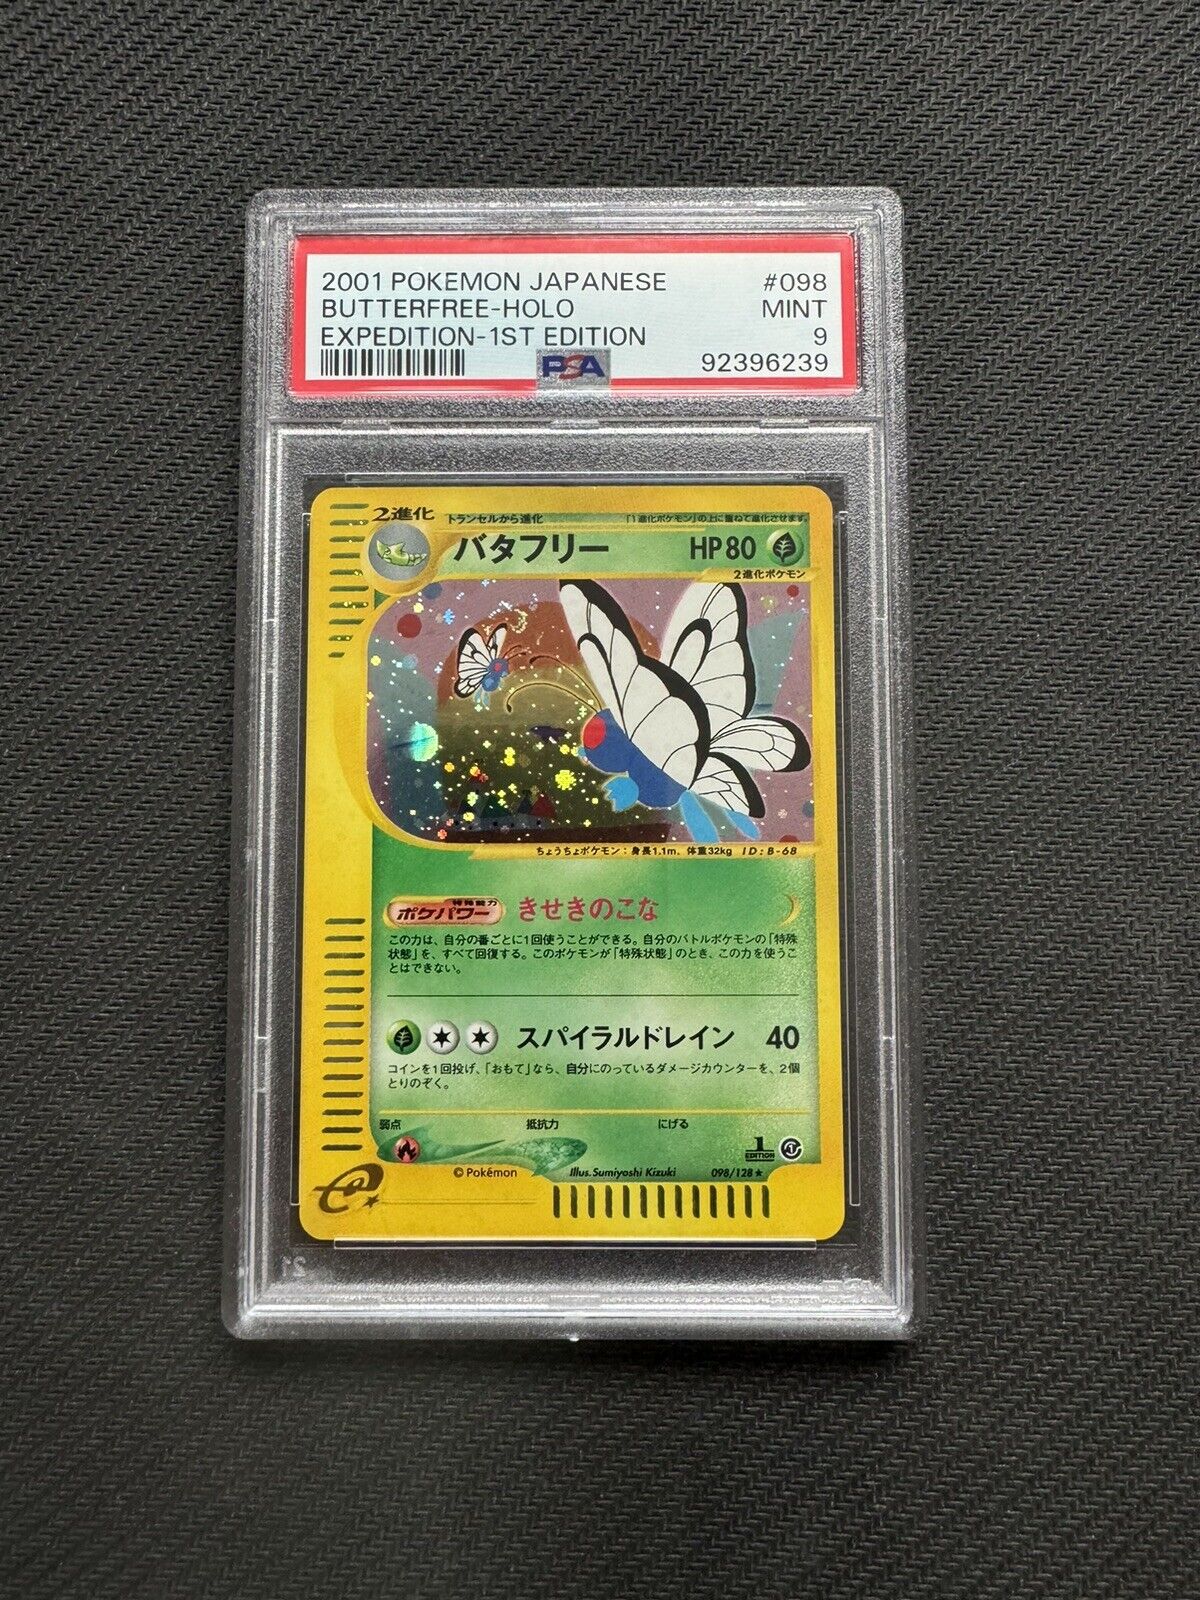 PSA Mint 9 Butterfree 1st Ed Japanese Expedition Holo 098/128 With Swirl 🌀